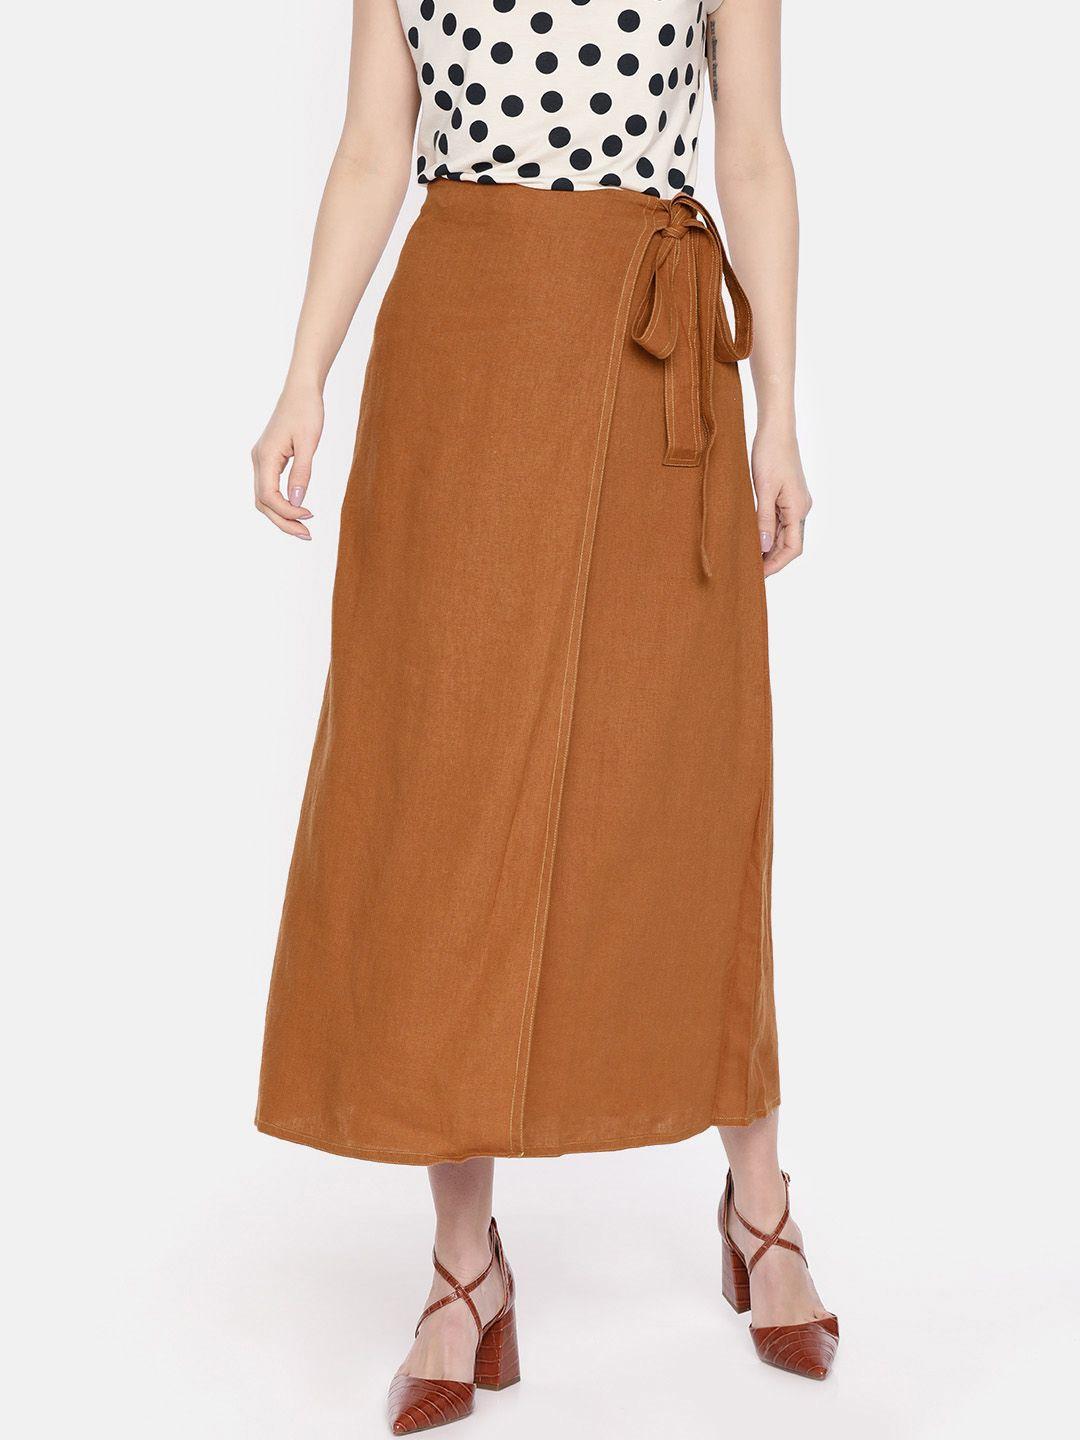 AND Brown Bohemian Flared Wrap Skirt